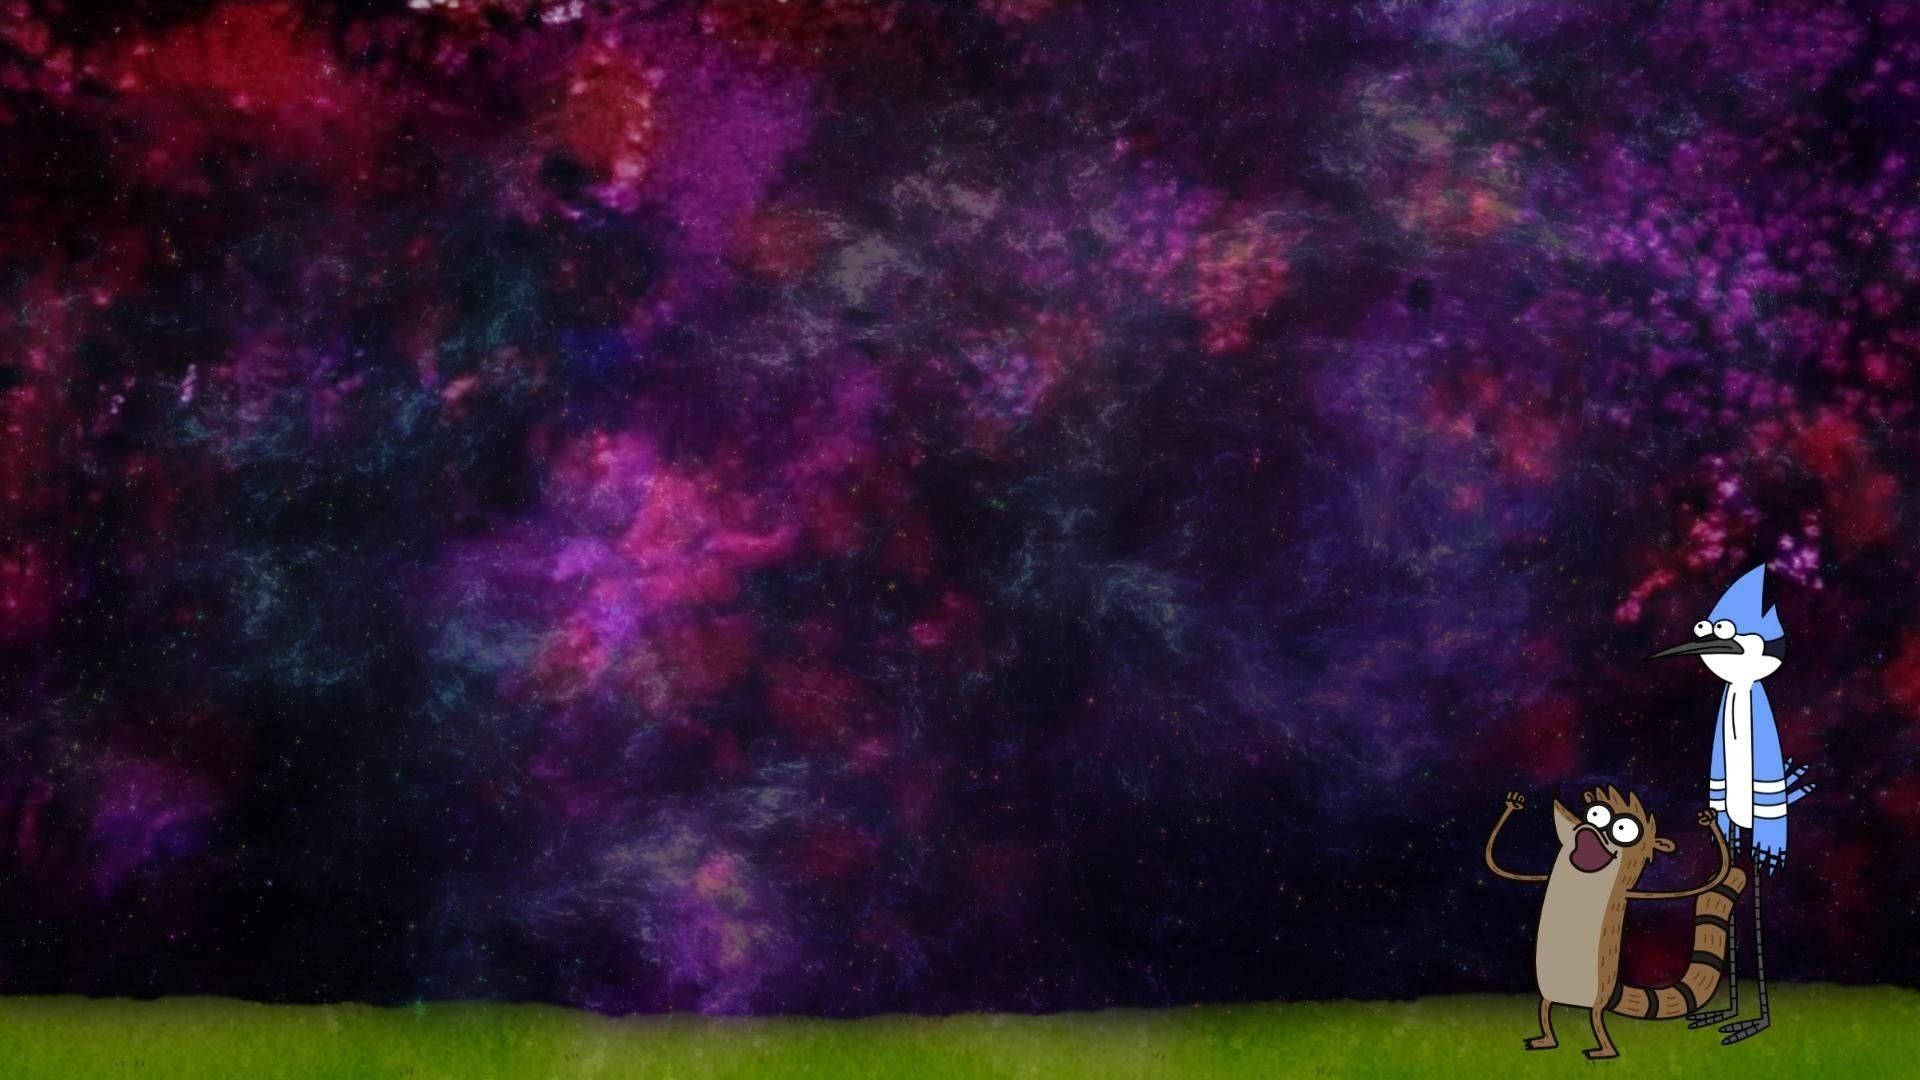 Engrossing Night Sky With Regular Show Characters Background